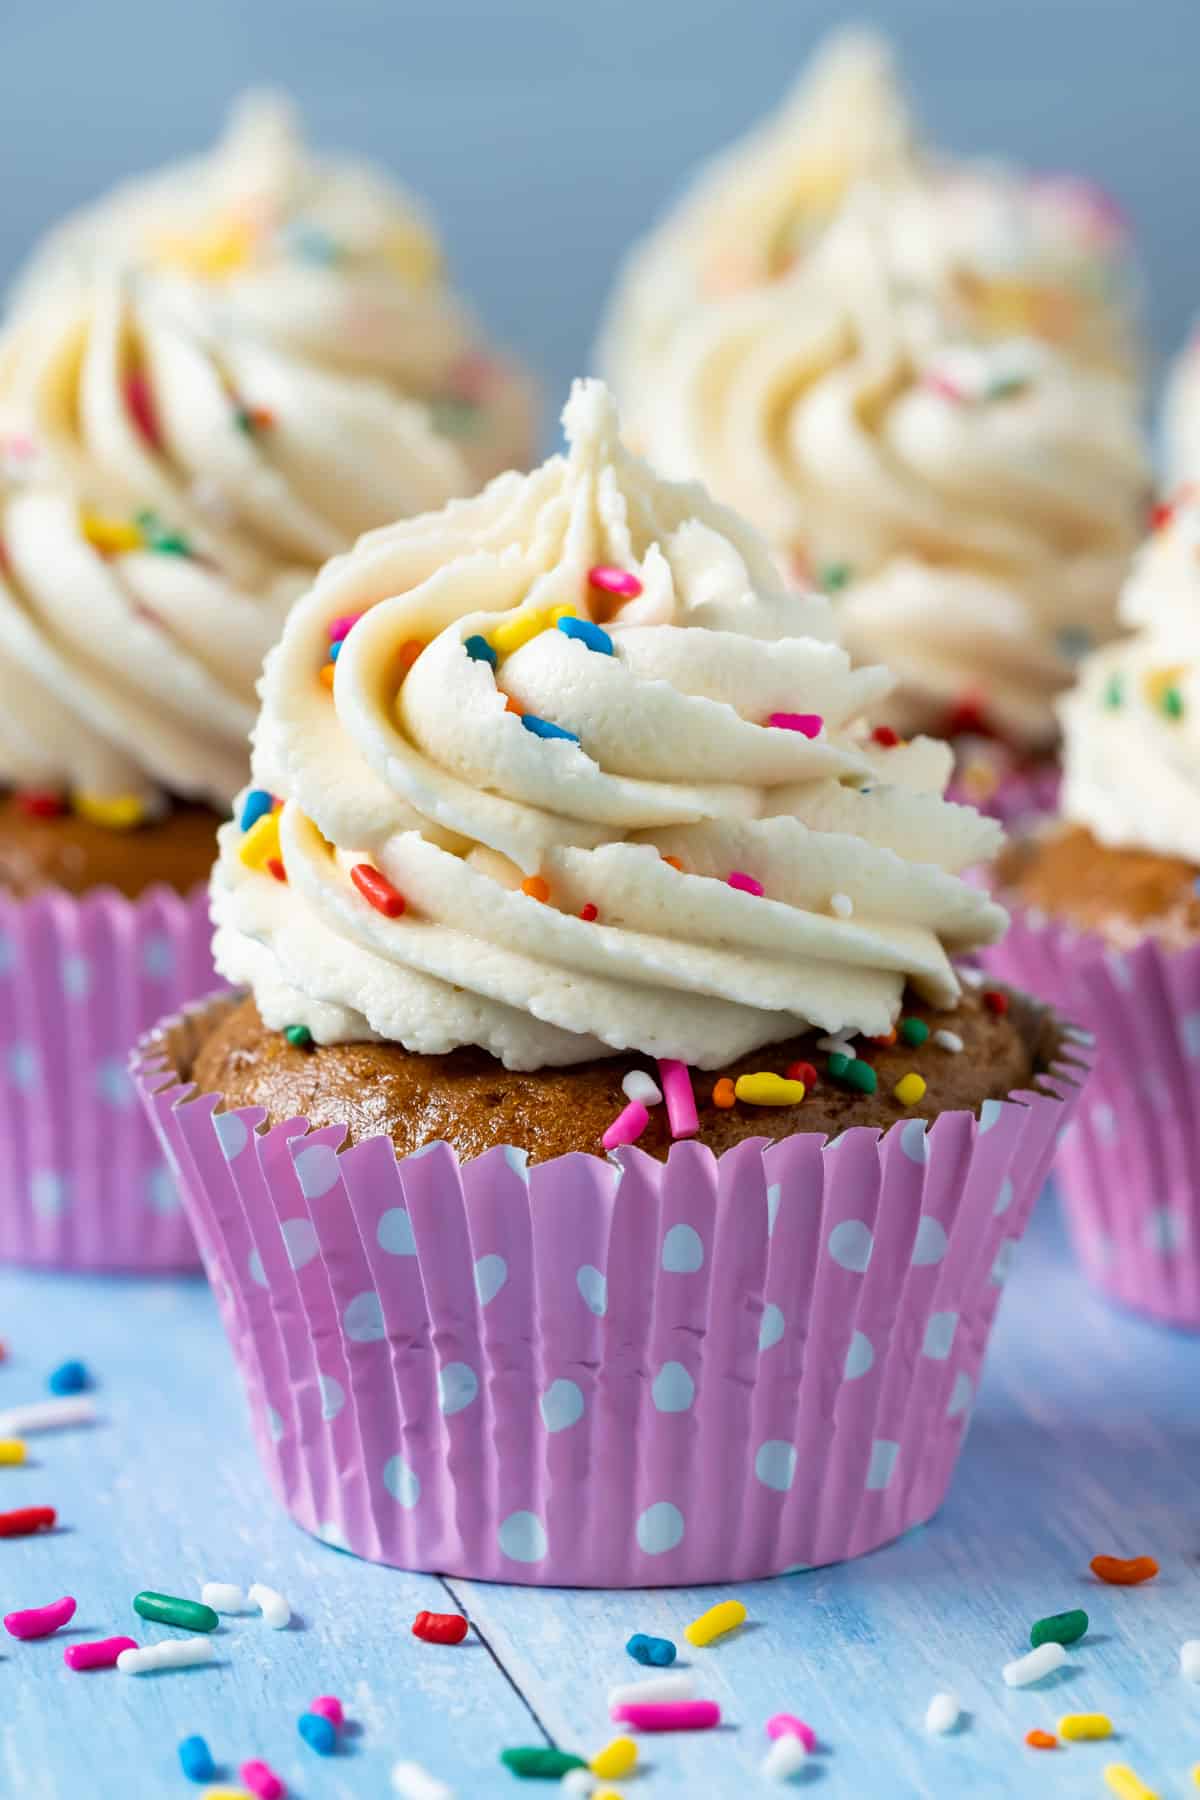 Vegan gluten free vanilla cupcakes topped with frosting and sprinkles.